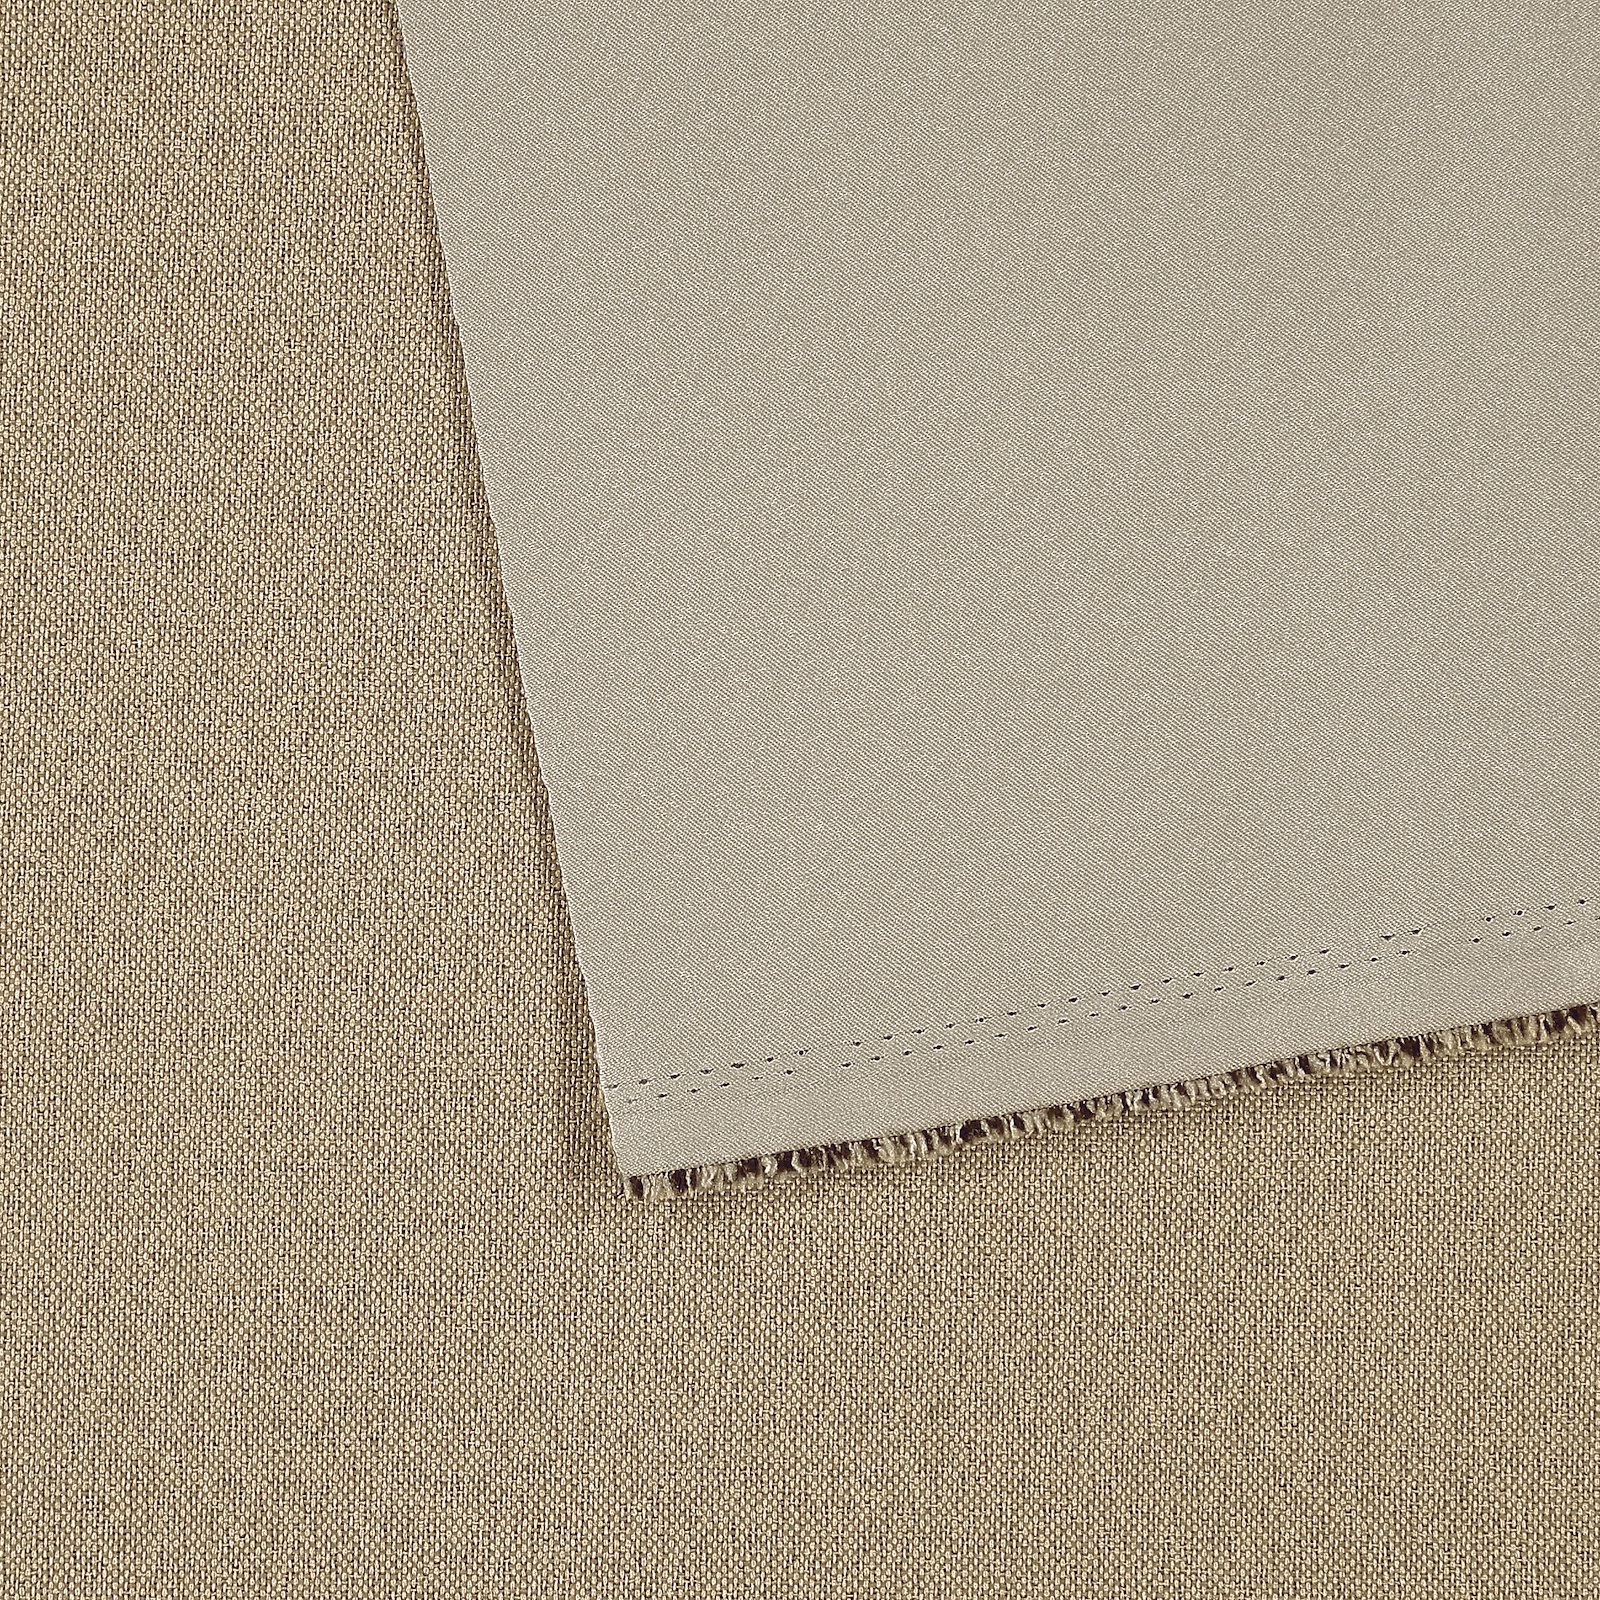 Woven dimout texture sand 815279_pack_b